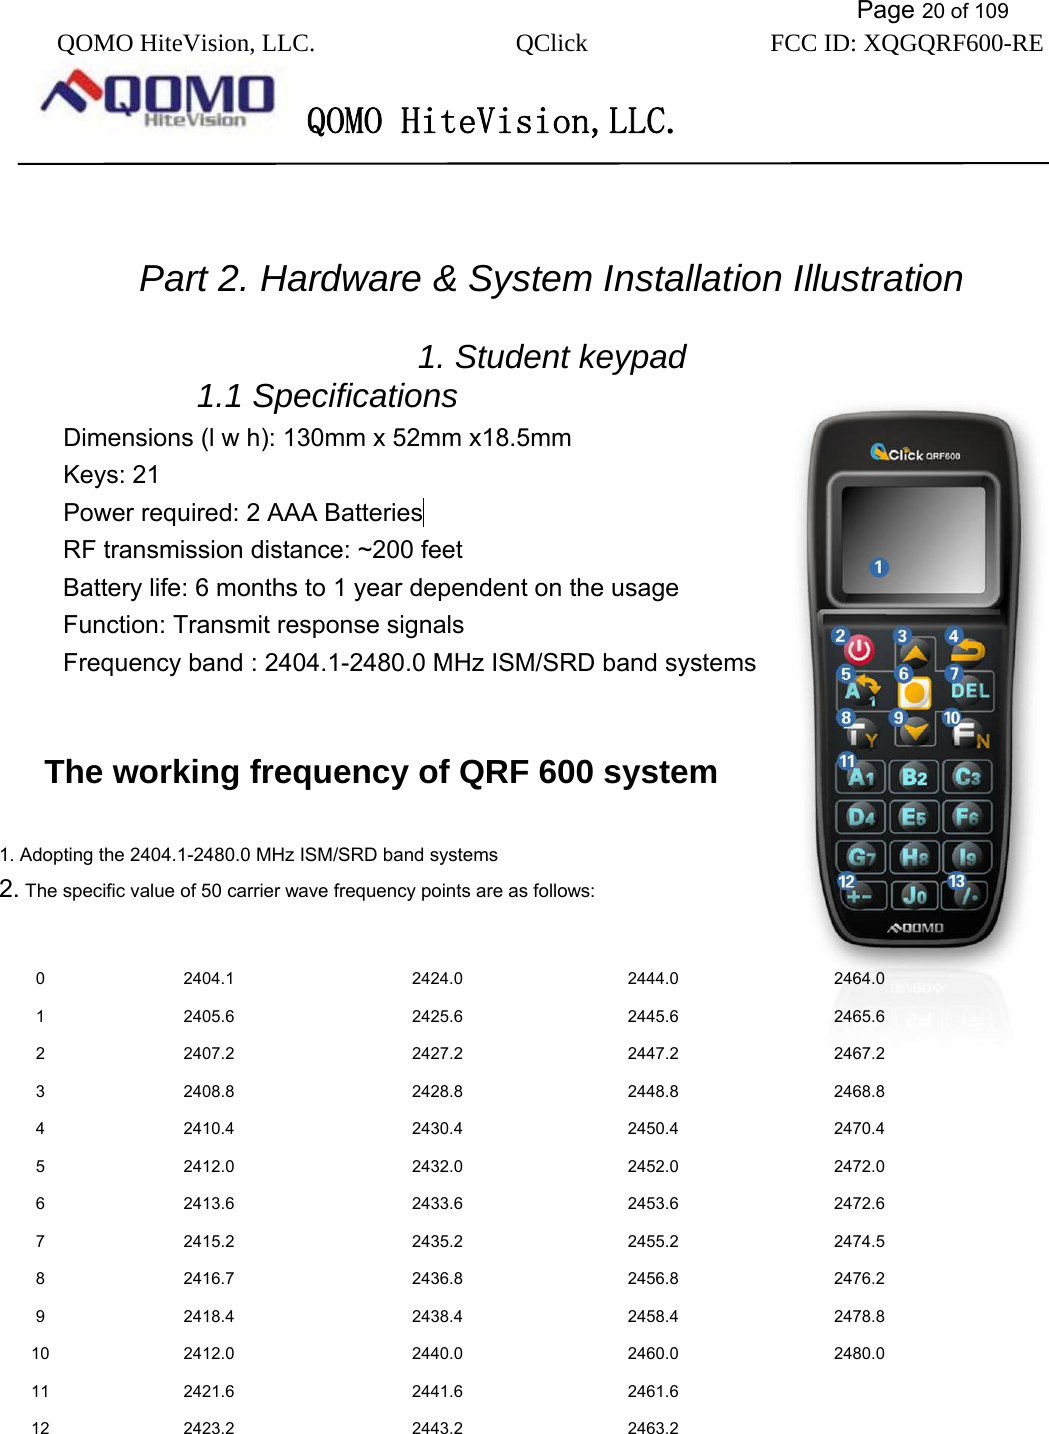           Page 20 of 109 QOMO HiteVision, LLC.  QClick        FCC ID: XQGQRF600-RE     QOMO HiteVision,LLC.     Part 2. Hardware &amp; System Installation Illustration  1. Student keypad   1.1 Specifications Dimensions (l w h): 130mm x 52mm x18.5mm Keys: 21 Power required: 2 AAA Batteries  RF transmission distance: ~200 feet Battery life: 6 months to 1 year dependent on the usage Function: Transmit response signals Frequency band : 2404.1-2480.0 MHz ISM/SRD band systems      The working frequency of QRF 600 system  1. Adopting the 2404.1-2480.0 MHz ISM/SRD band systems 2. The specific value of 50 carrier wave frequency points are as follows:                                                     0 2404.1  2424.0  2444.0  2464.0 1 2405.6  2425.6  2445.6  2465.6 2 2407.2  2427.2  2447.2  2467.2 3 2408.8  2428.8  2448.8  2468.8 4 2410.4  2430.4  2450.4  2470.4 5 2412.0  2432.0  2452.0  2472.0 6 2413.6  2433.6  2453.6  2472.6 7 2415.2  2435.2  2455.2  2474.5 8 2416.7  2436.8  2456.8  2476.2 9 2418.4  2438.4  2458.4  2478.8 10 2412.0  2440.0  2460.0  2480.0 11 2421.6  2441.6  2461.6   12 2423.2  2443.2  2463.2   